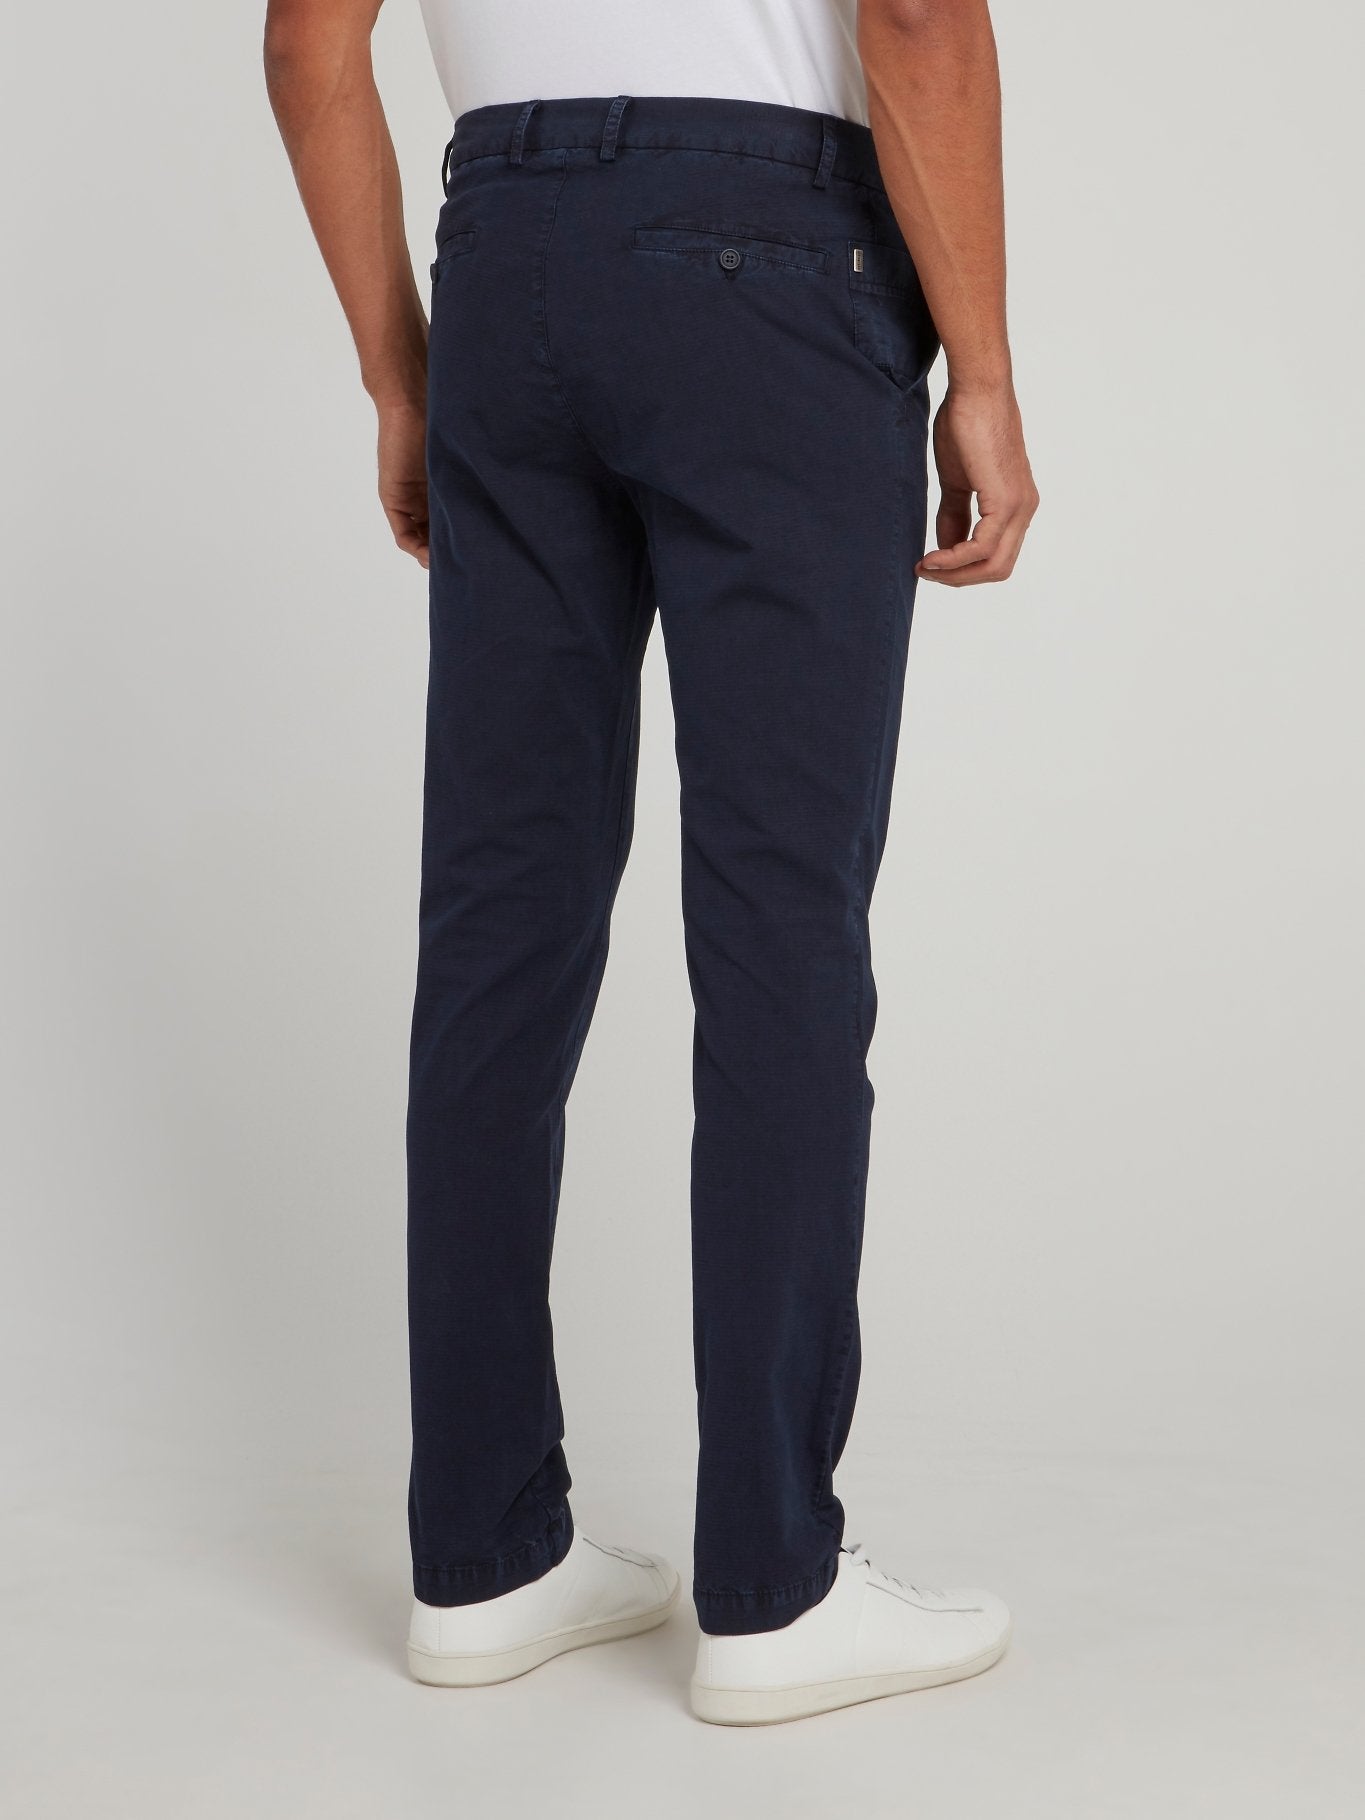 Navy Slim Fit Tailored Pants